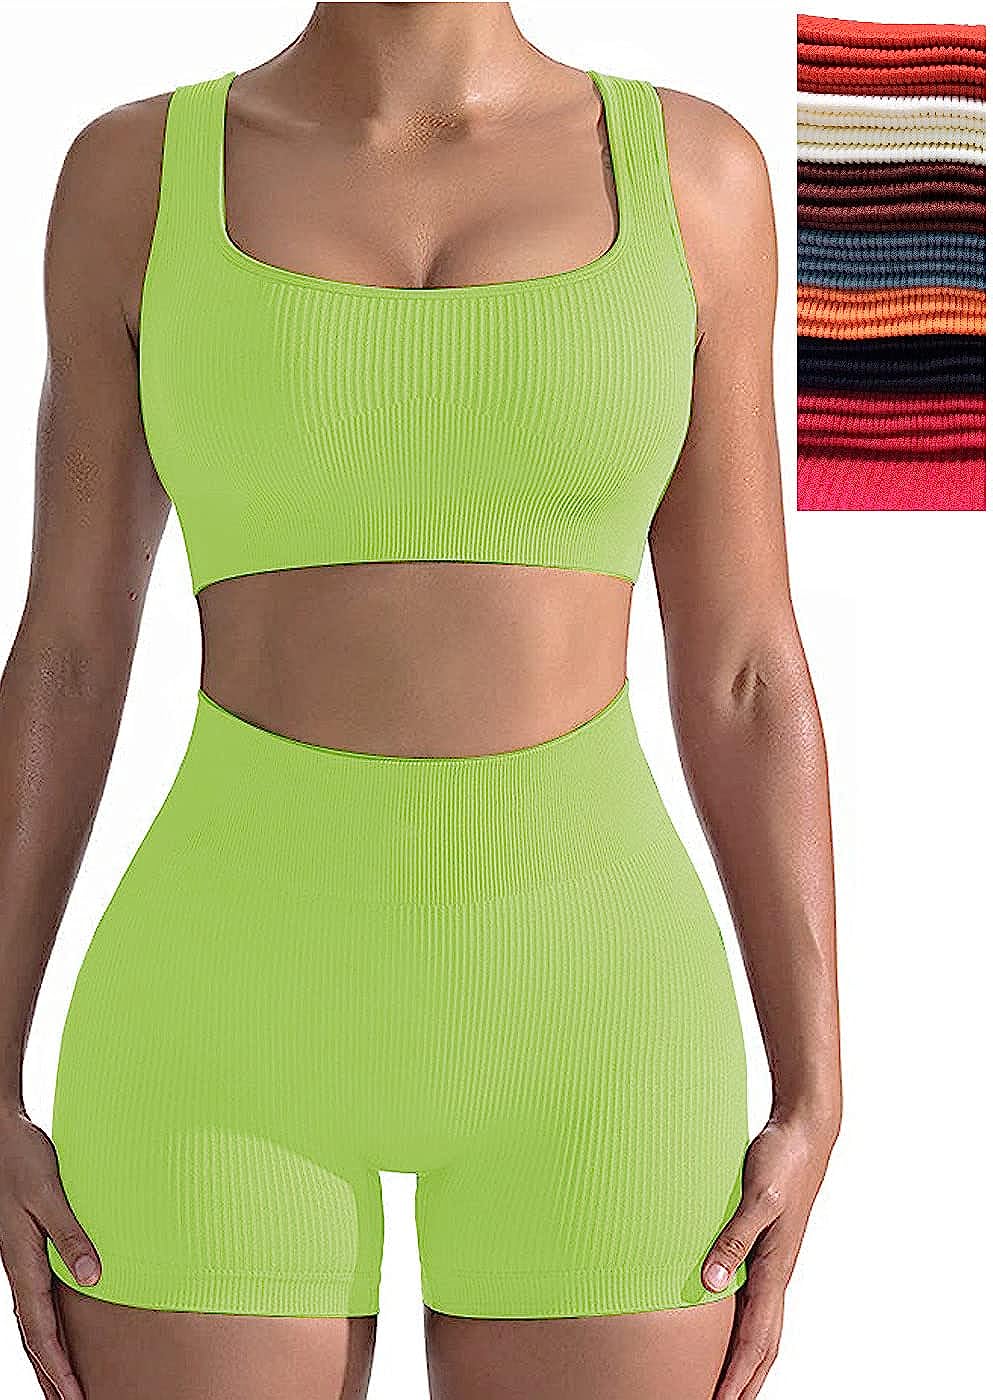 Bulk-buy Women Active Wear Solid Fluorescent Green Top High Bra High Waist  Slim Fitted Tummy Control Leggings Yoga Outfits Wear price comparison